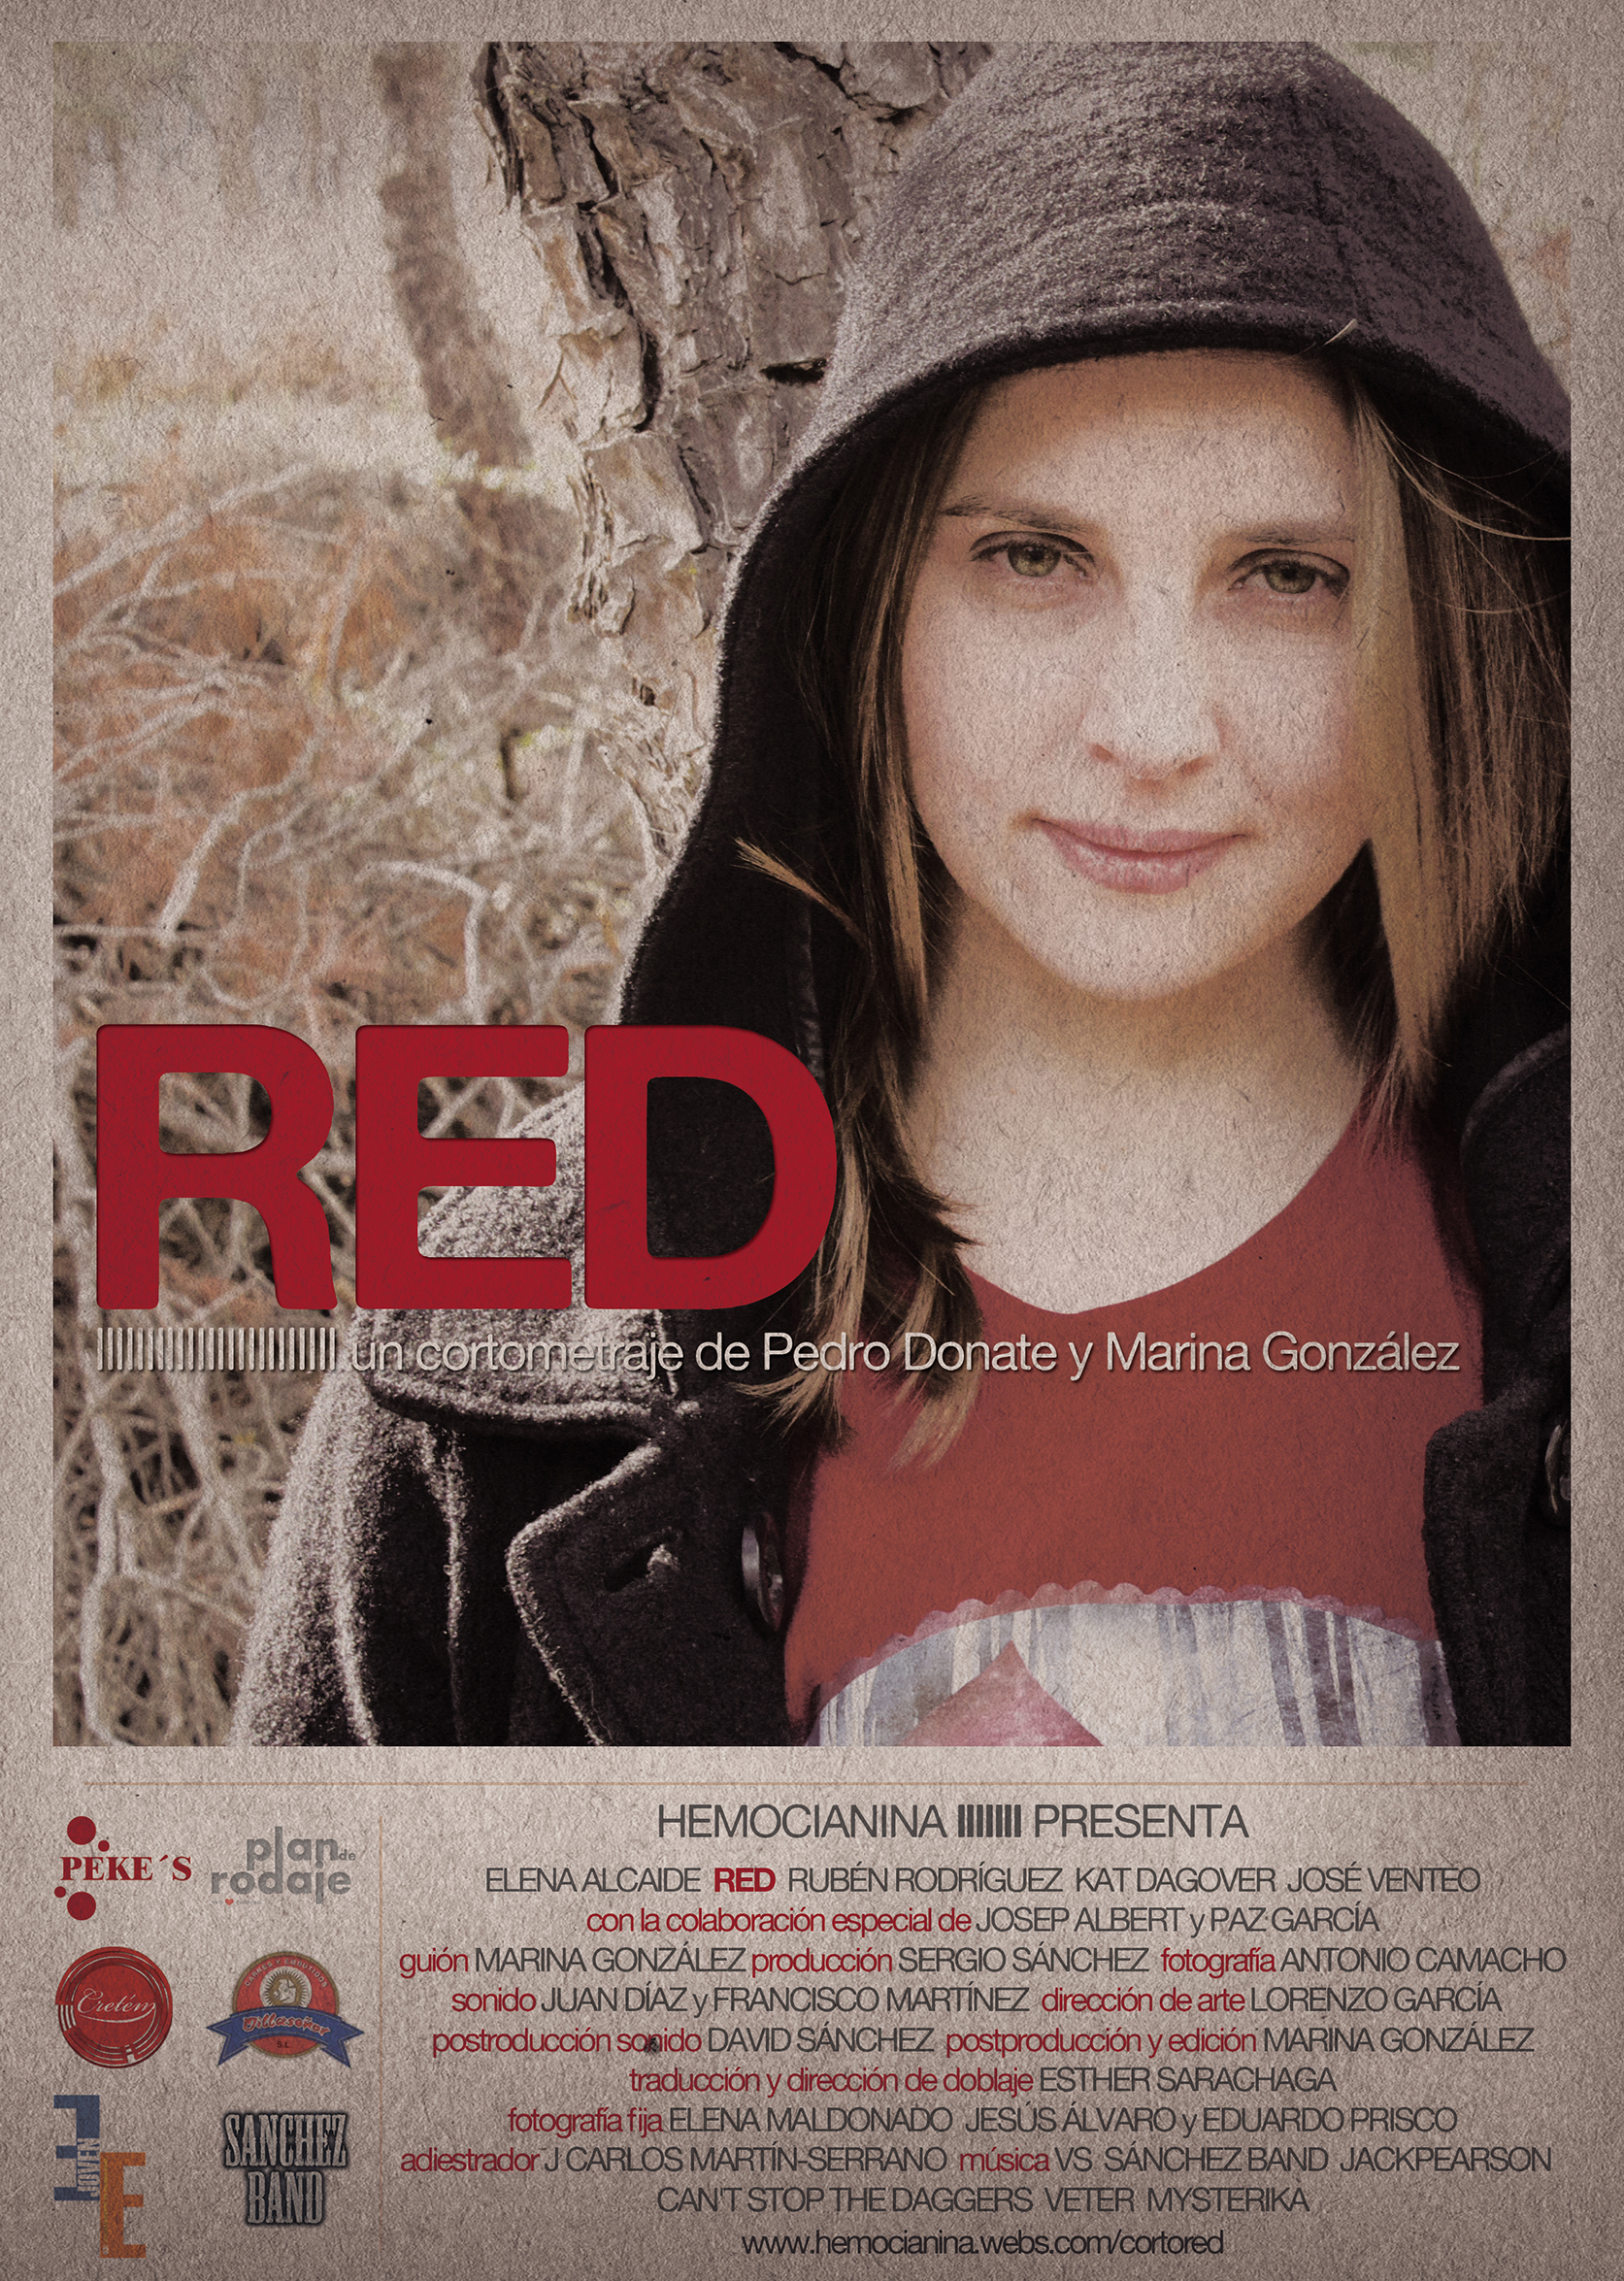 Red Official Poster